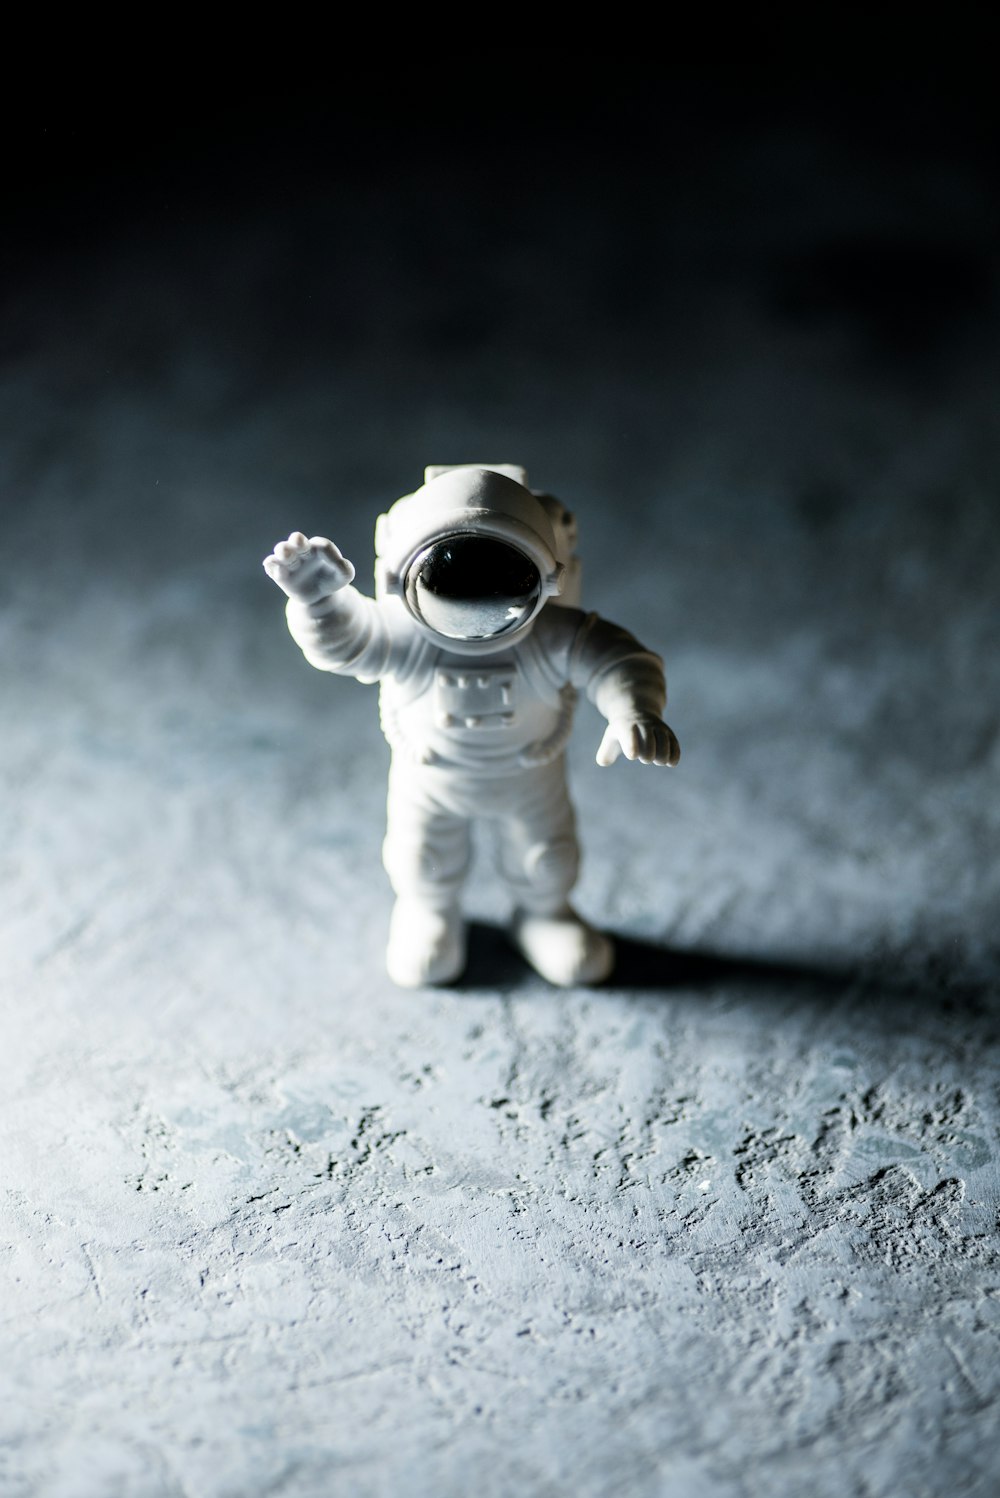 a small toy astronaut standing on the moon